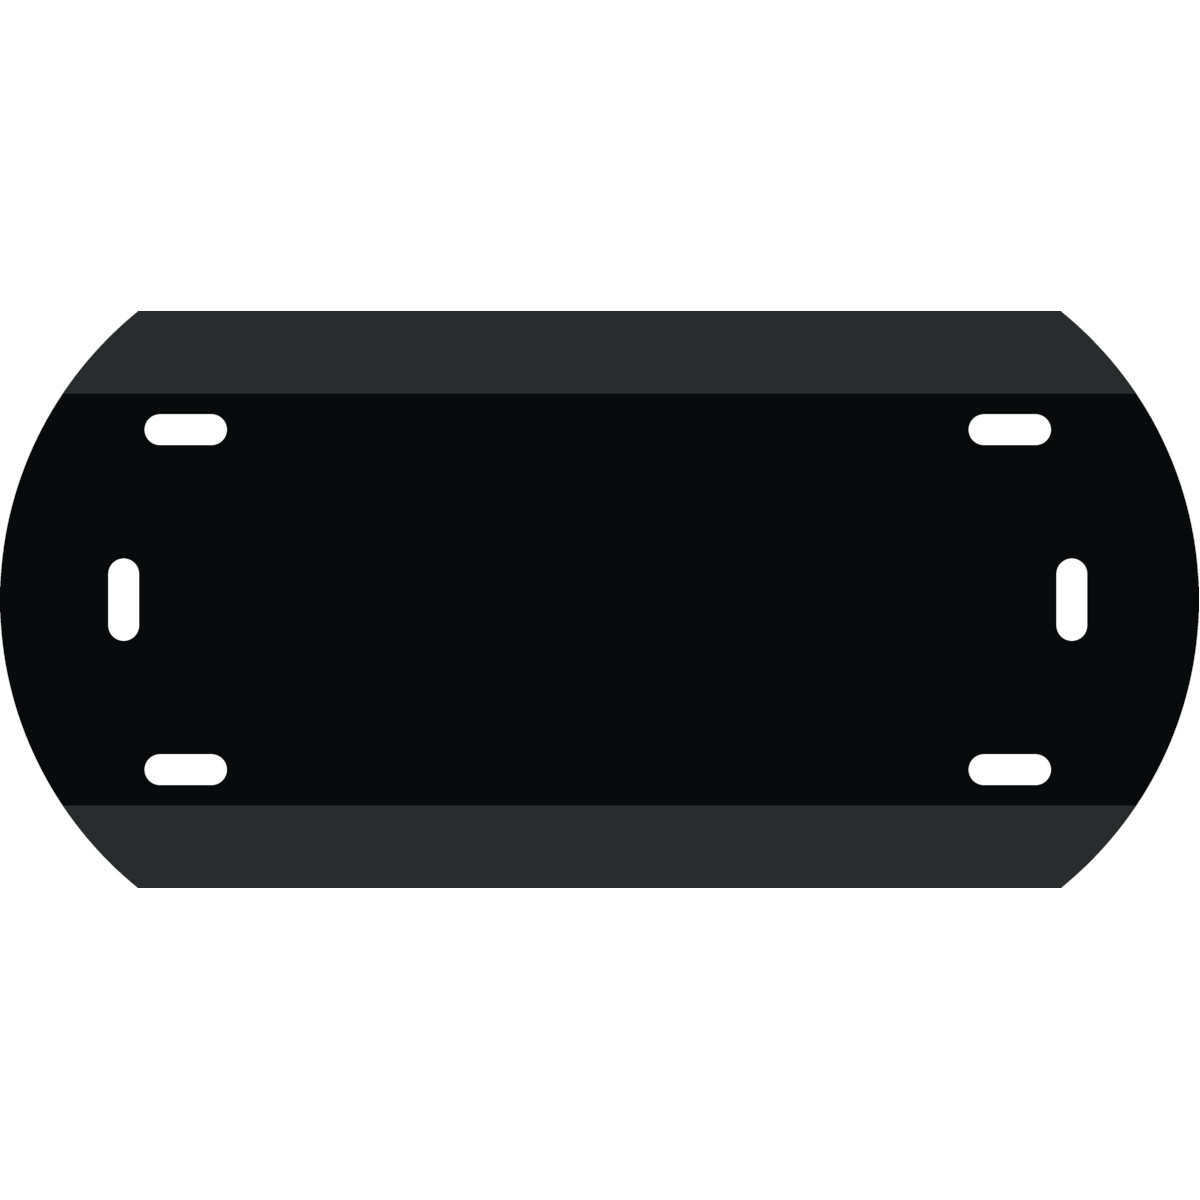 1" Character Polyethylene Holder - Fits 2 Characters